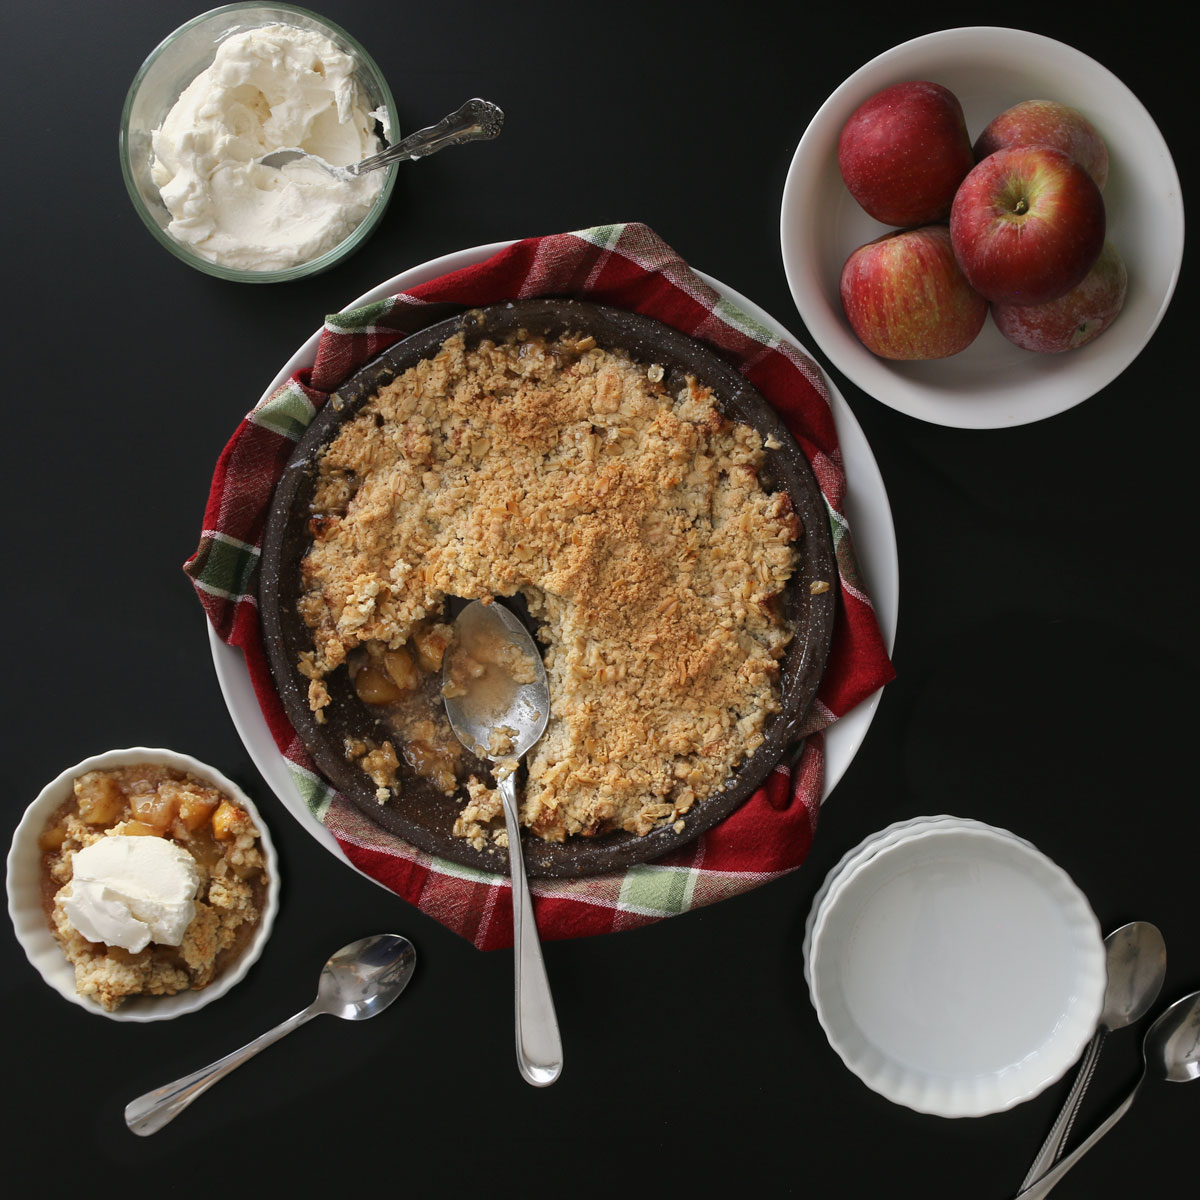 pan of apple crisp surrounded by whole apples, a bowl of whipped cream, and plates for dishing up.